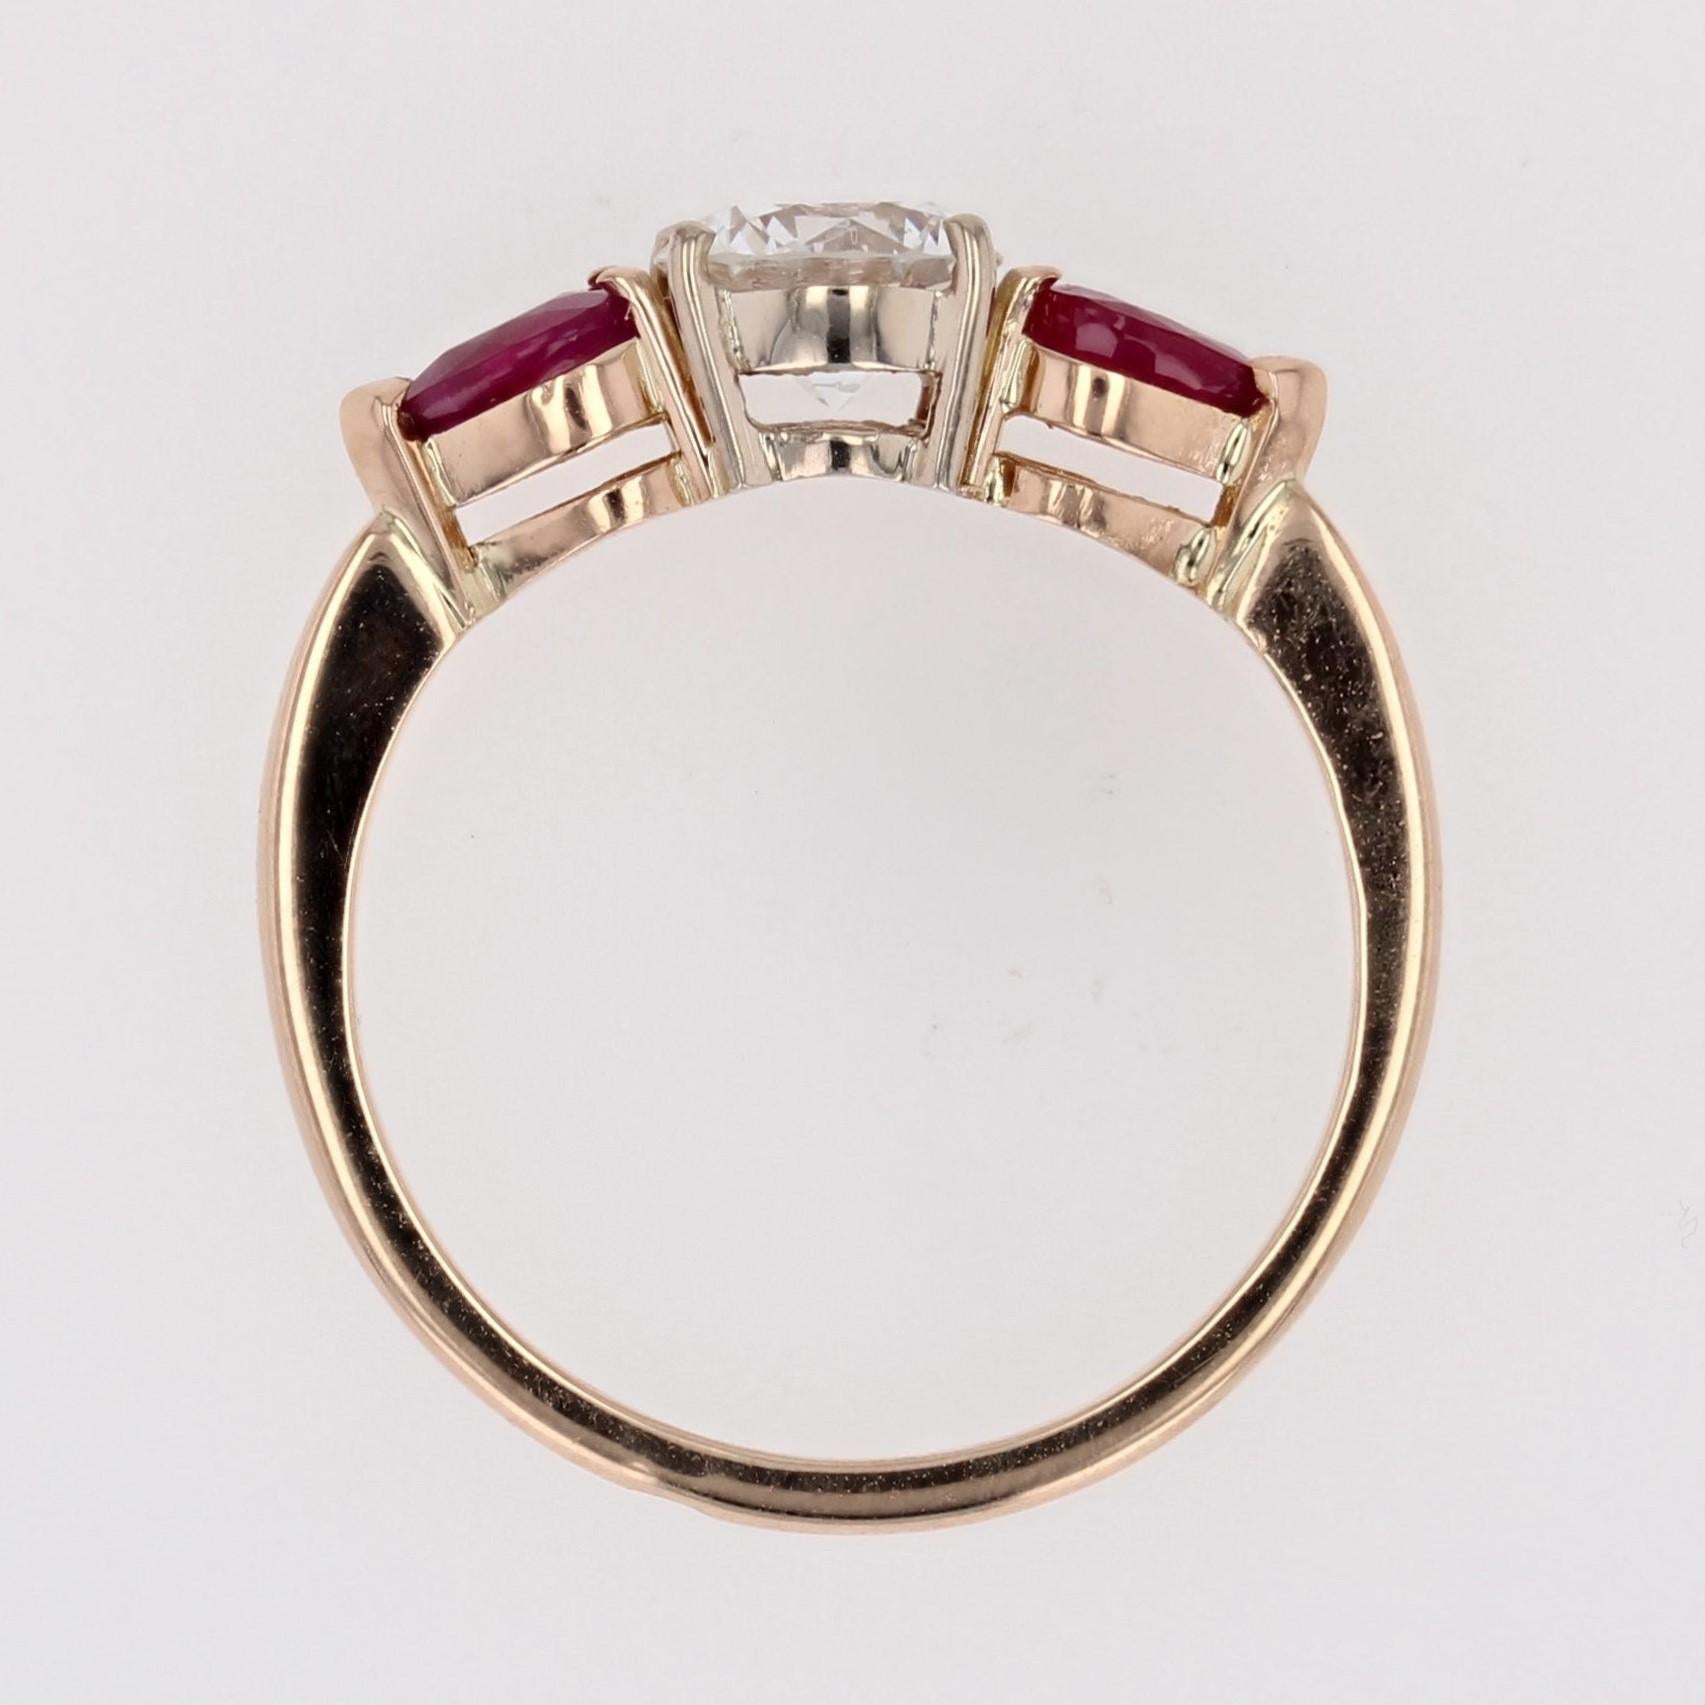 Baume Creation Rubies E.VVS Diamond Yellow Gold Trilogy Ring For Sale 5